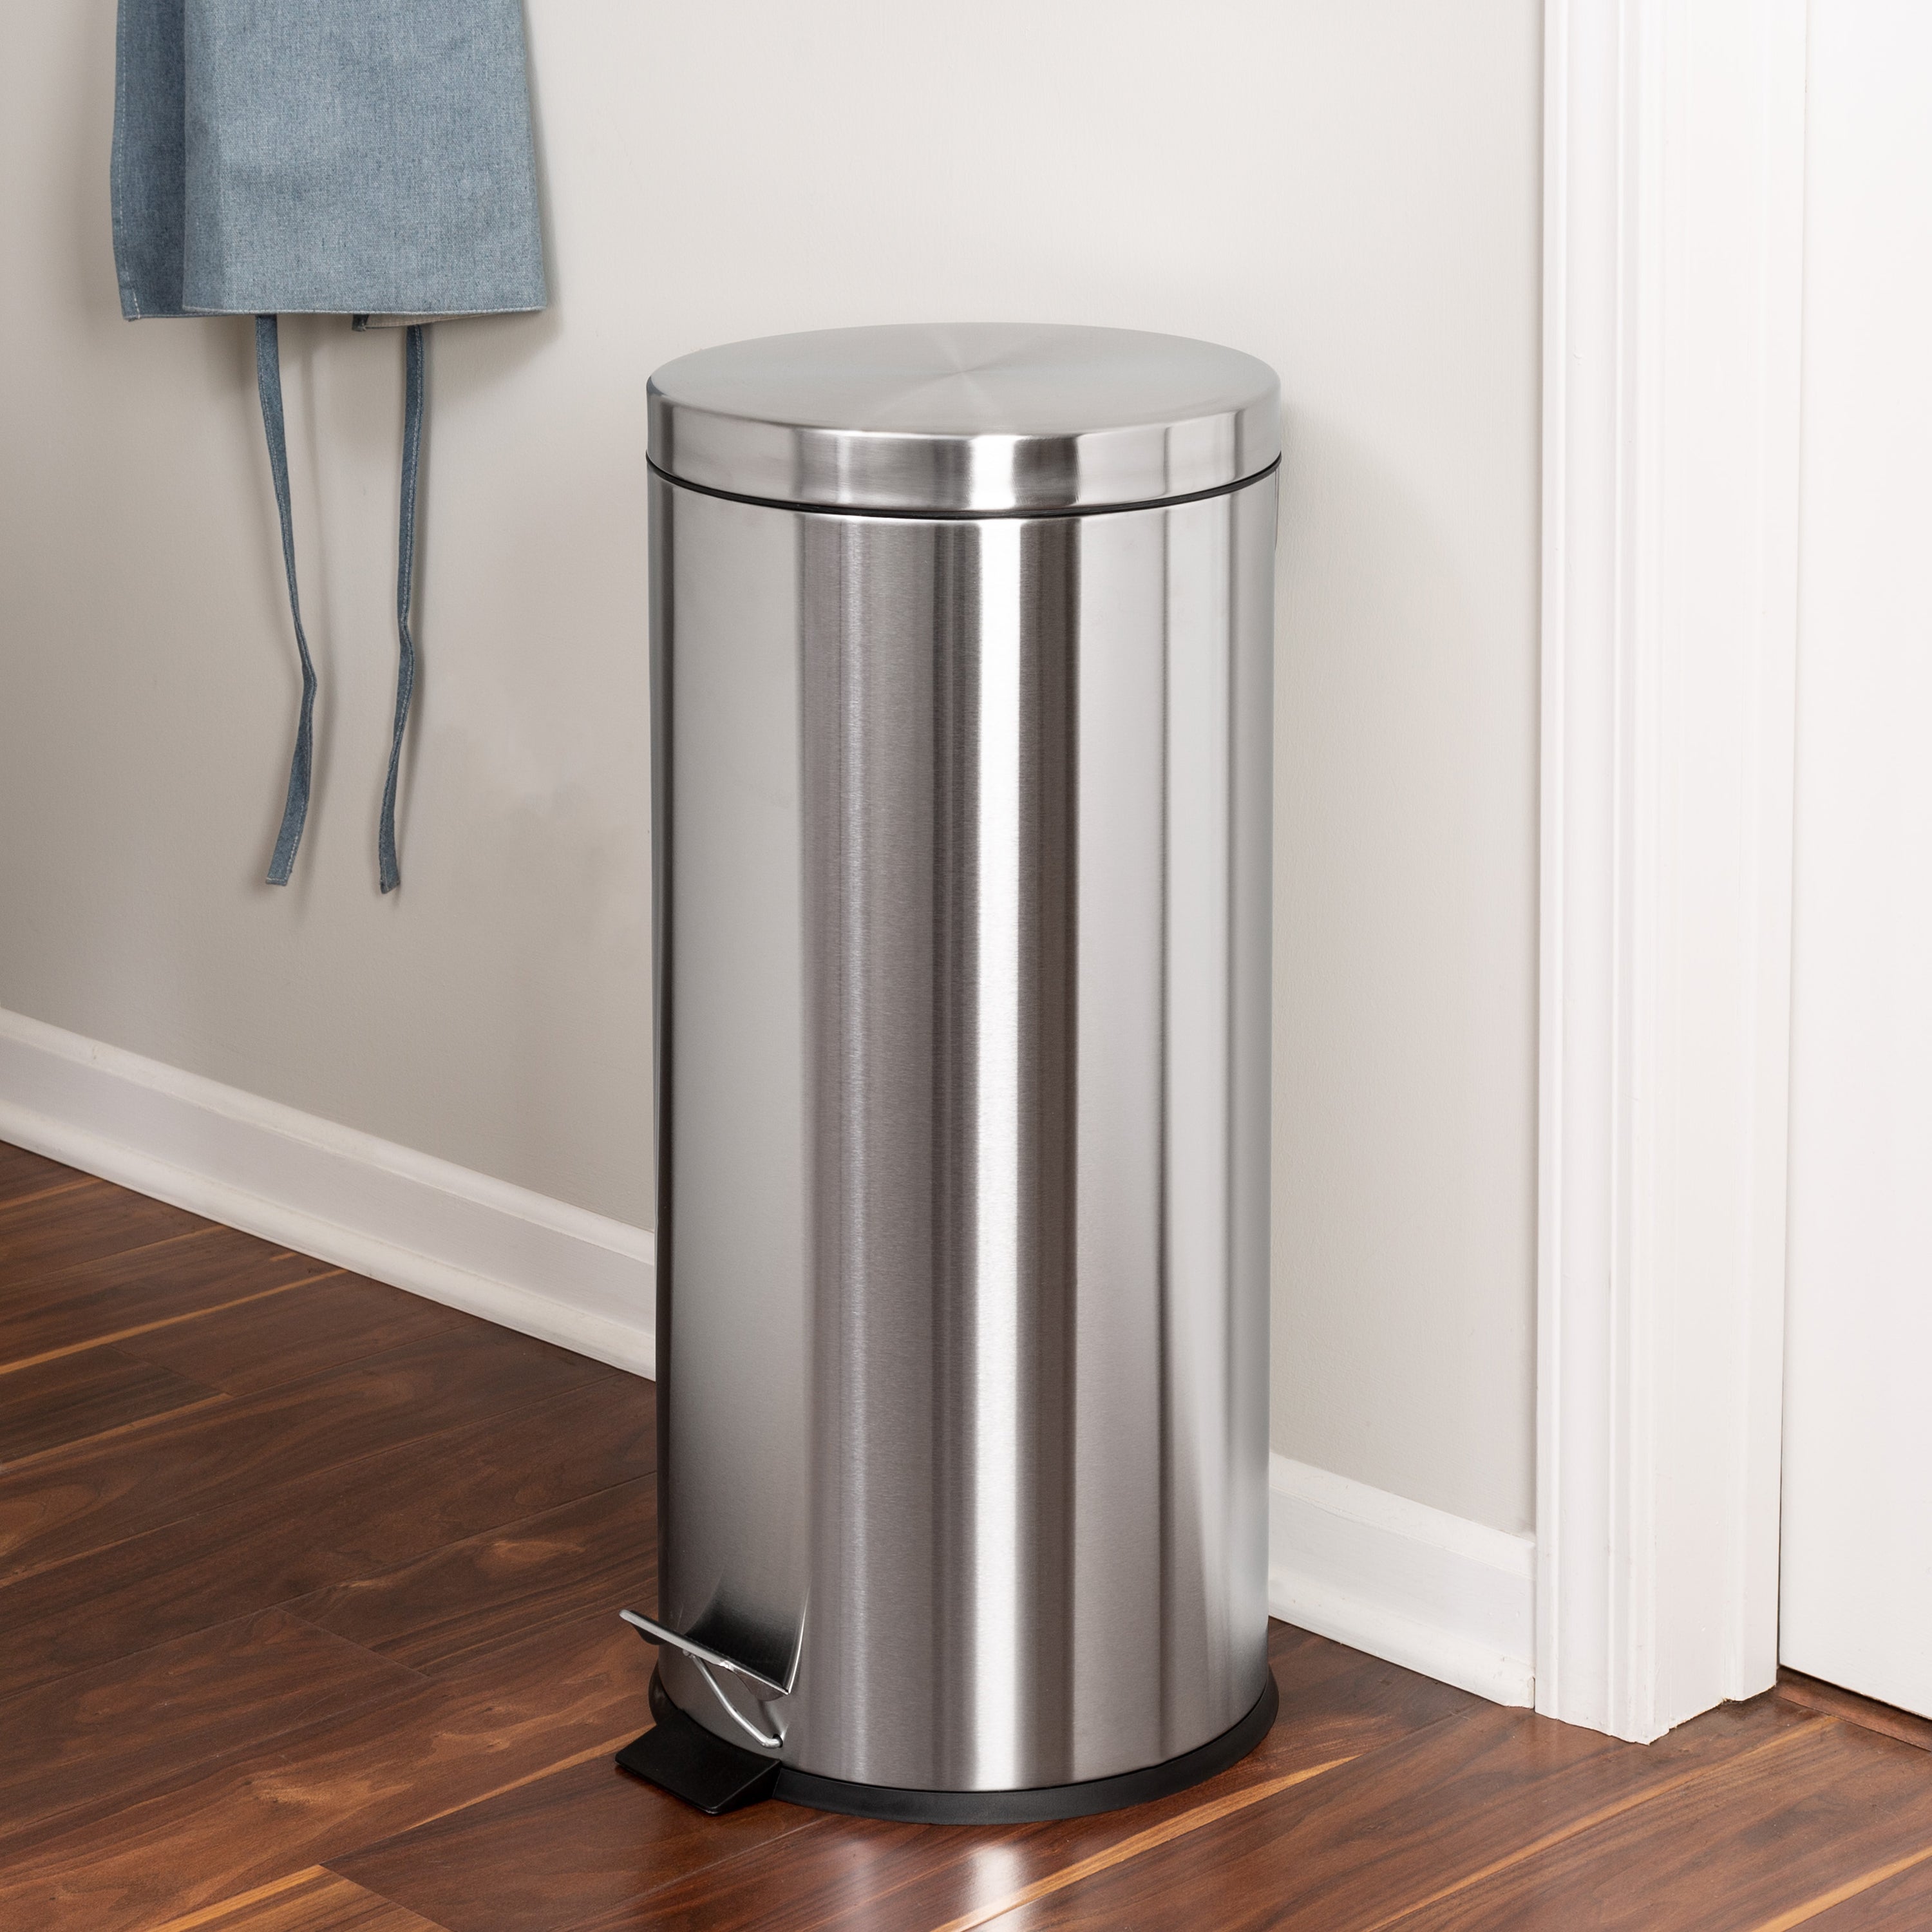 Honey-Can-Do 8 Gallon Round Stainless Steel Kitchen Step Trash Can, Silver - image 2 of 3